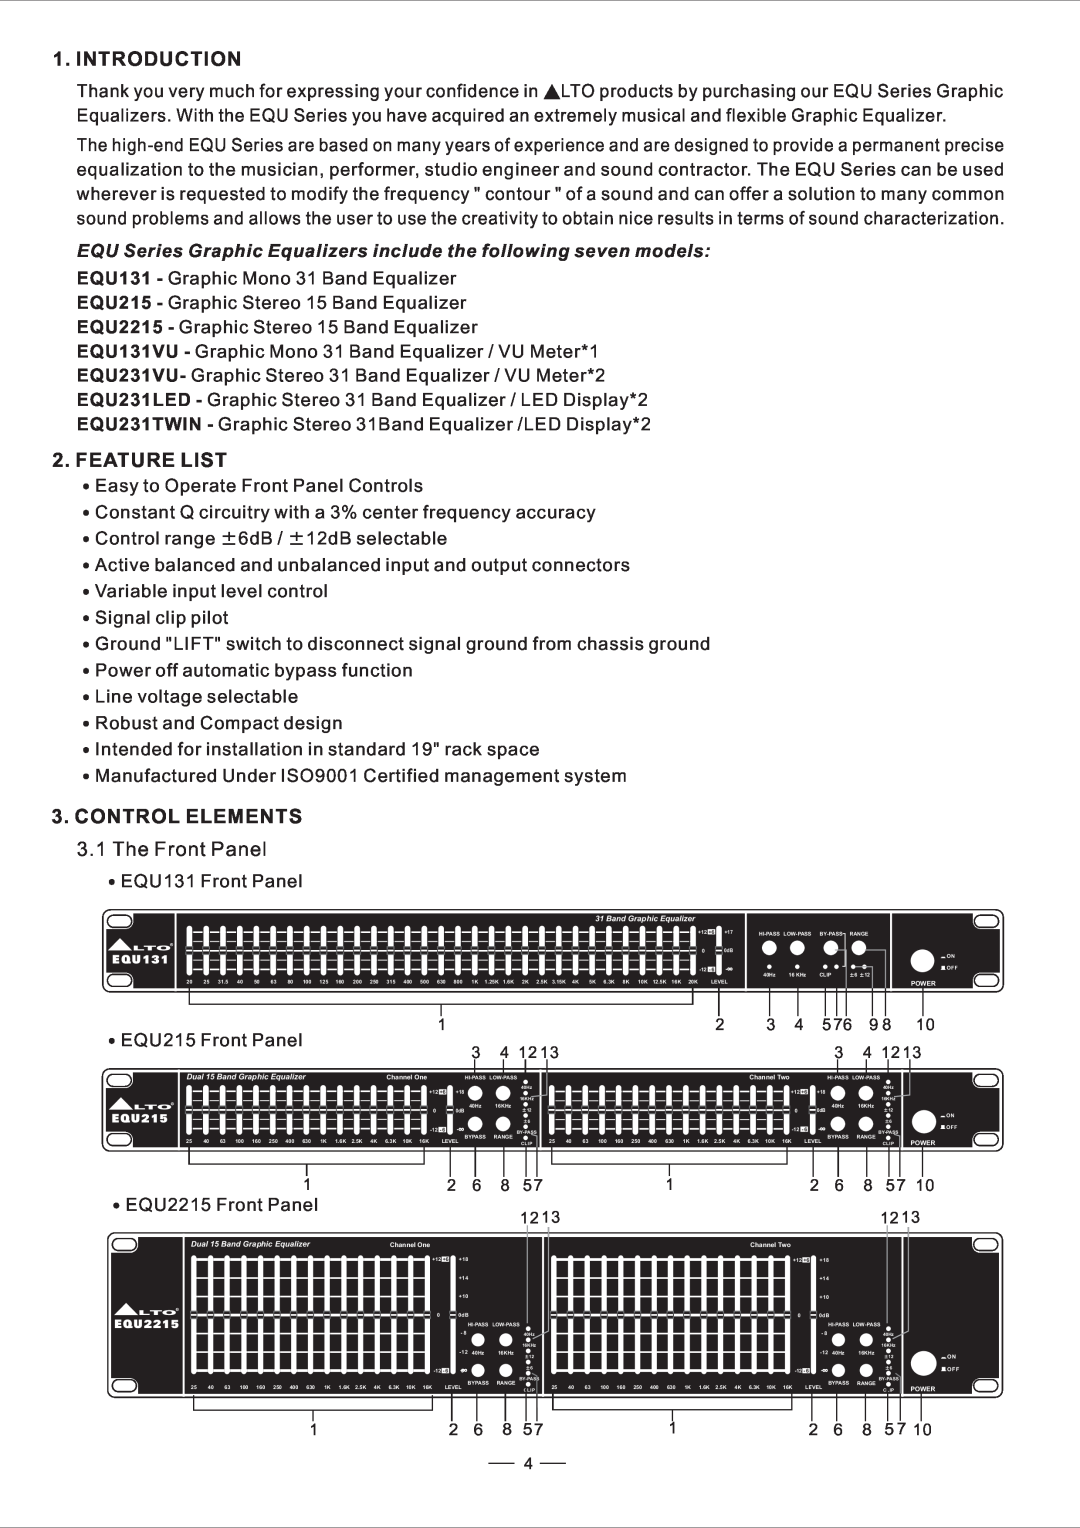 Nilfisk-ALTO EQU user manual Introduction, Feature List, Control Elements, The Front Panel 